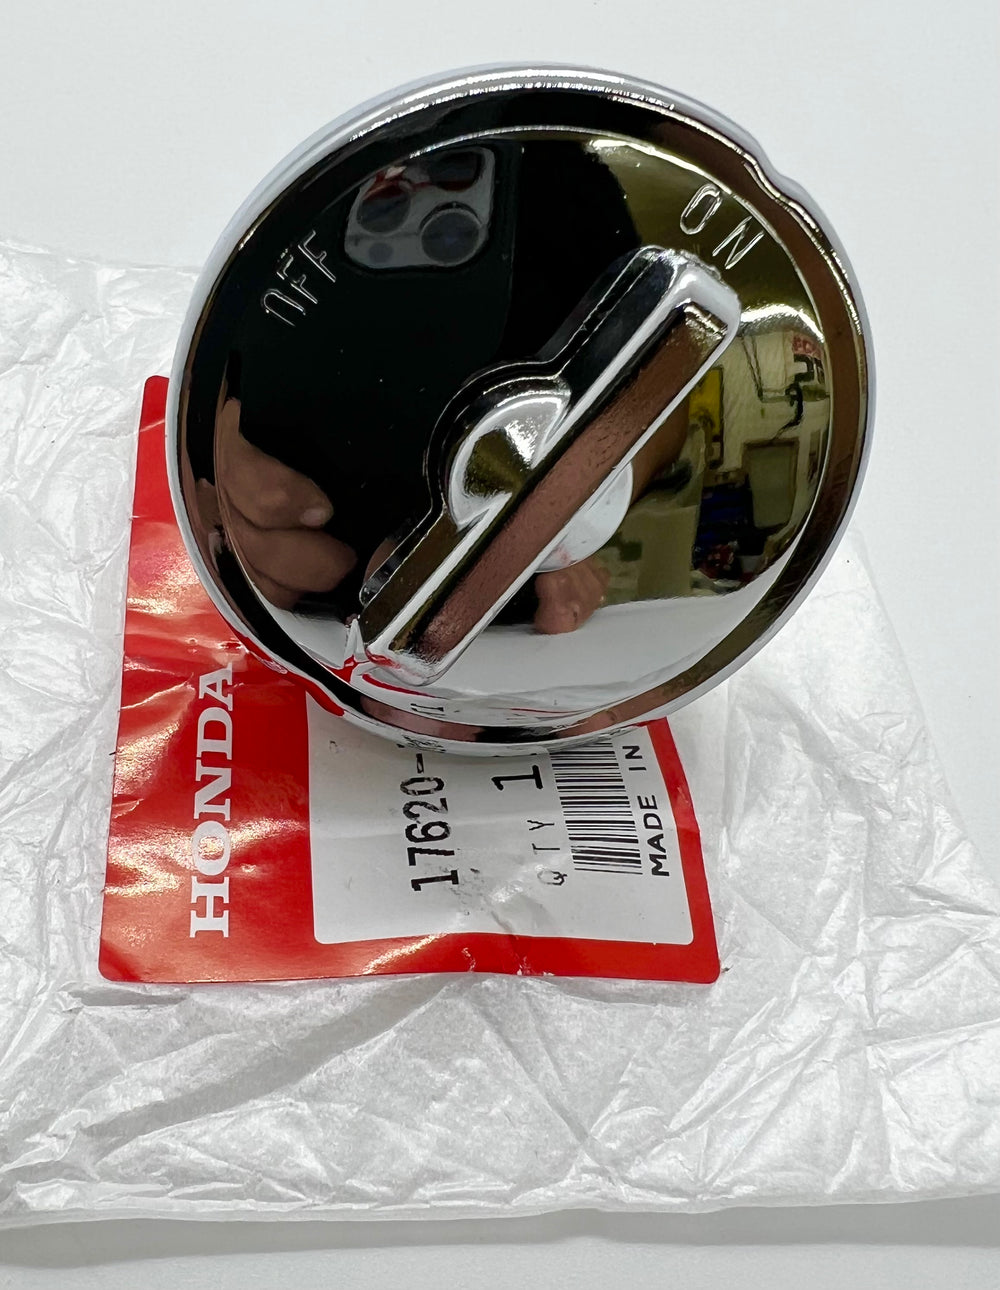 Oem Honda chrome gas cap with vent for ATC90  as well as ATC70s